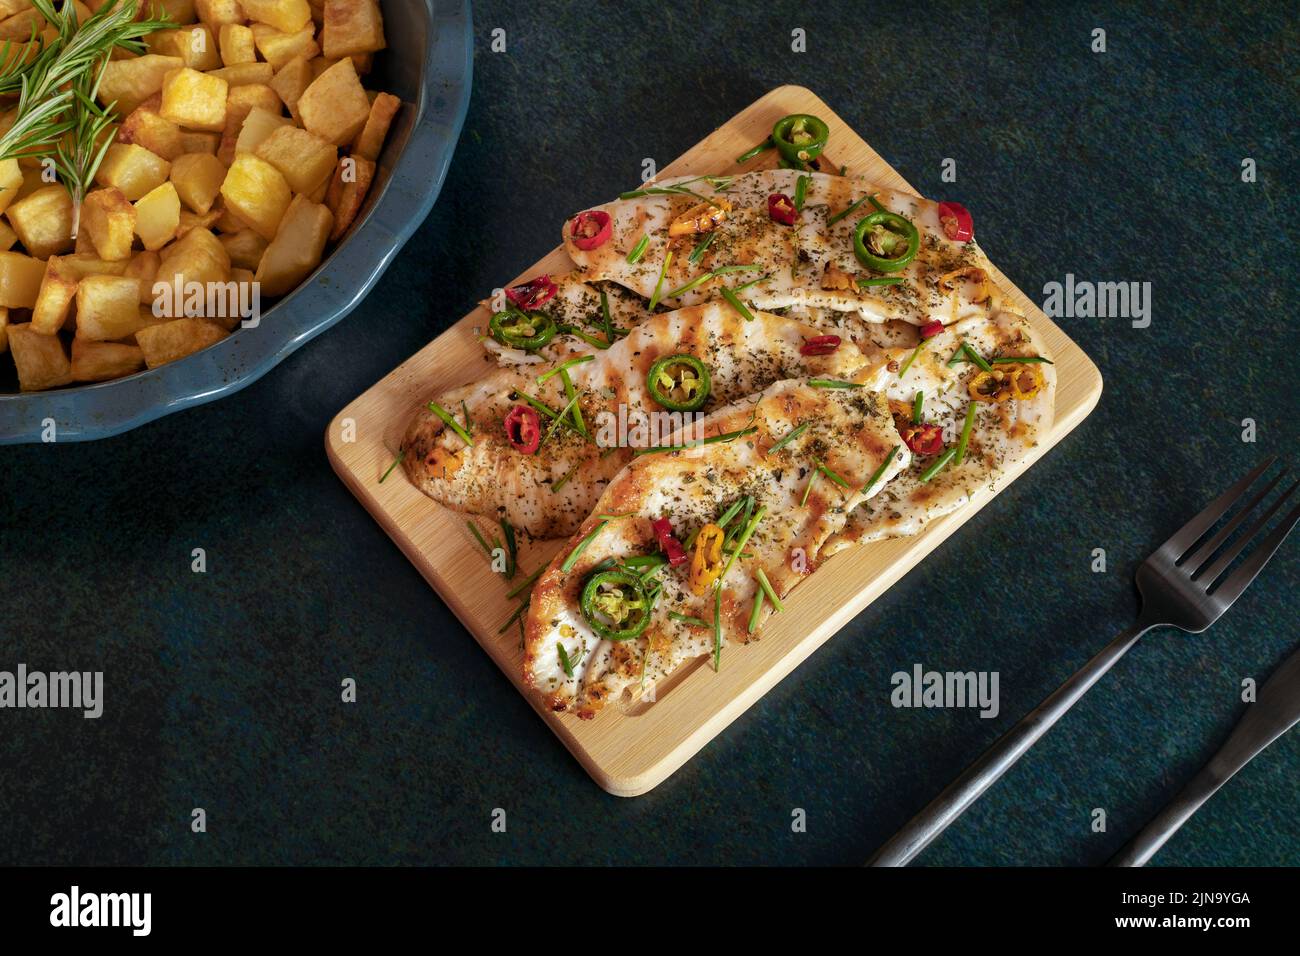 Grilled chicken breast cooked with three different colors chili peppers and aromatic herbs. Baked potatoes on the background. Stock Photo